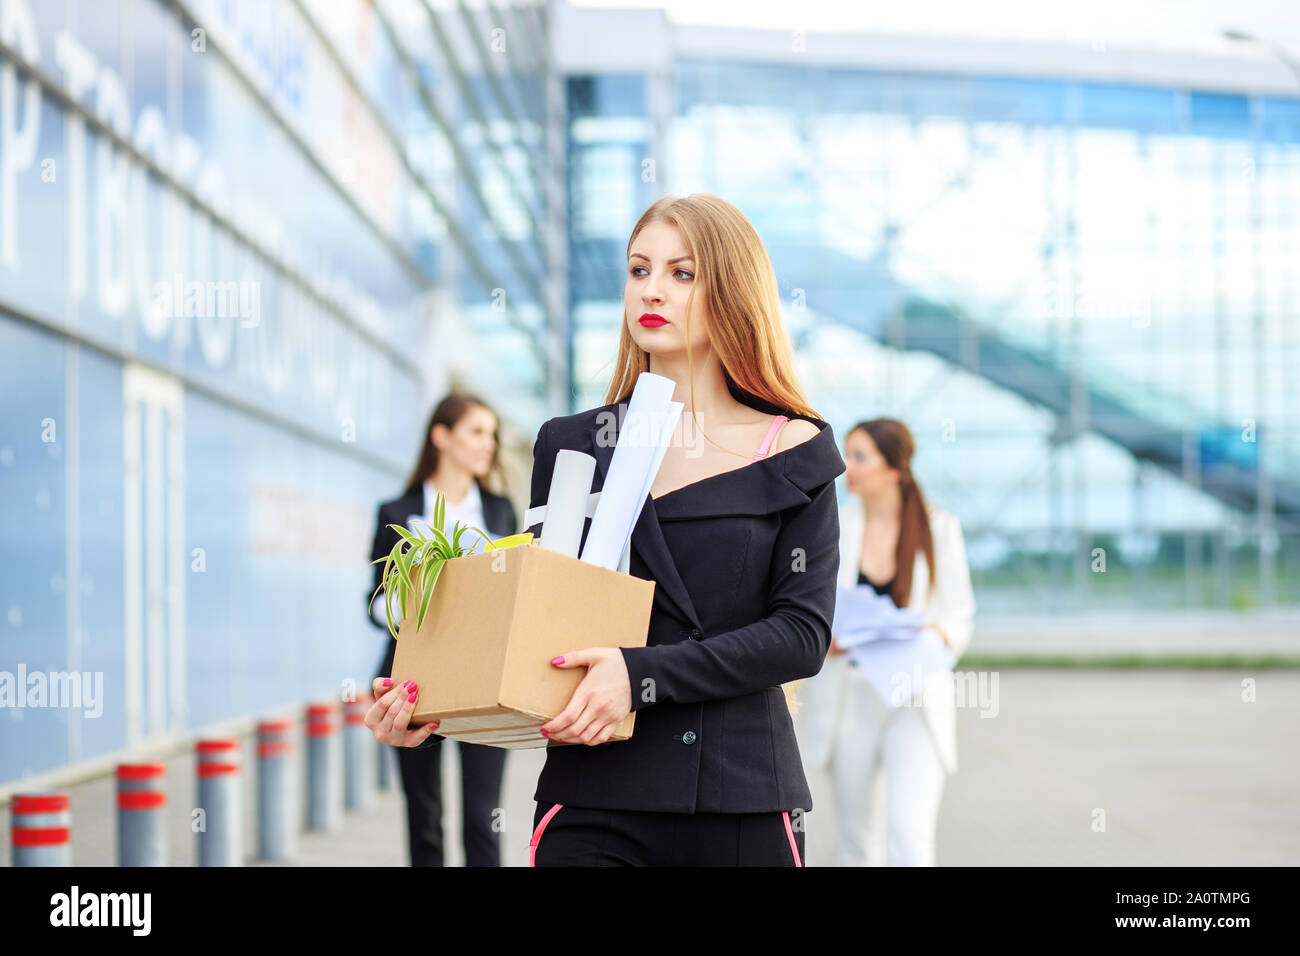 The woman was fired from her job. The end of a career. Concept for business, unemployment, labor exchange and dismissal. Stock Photo